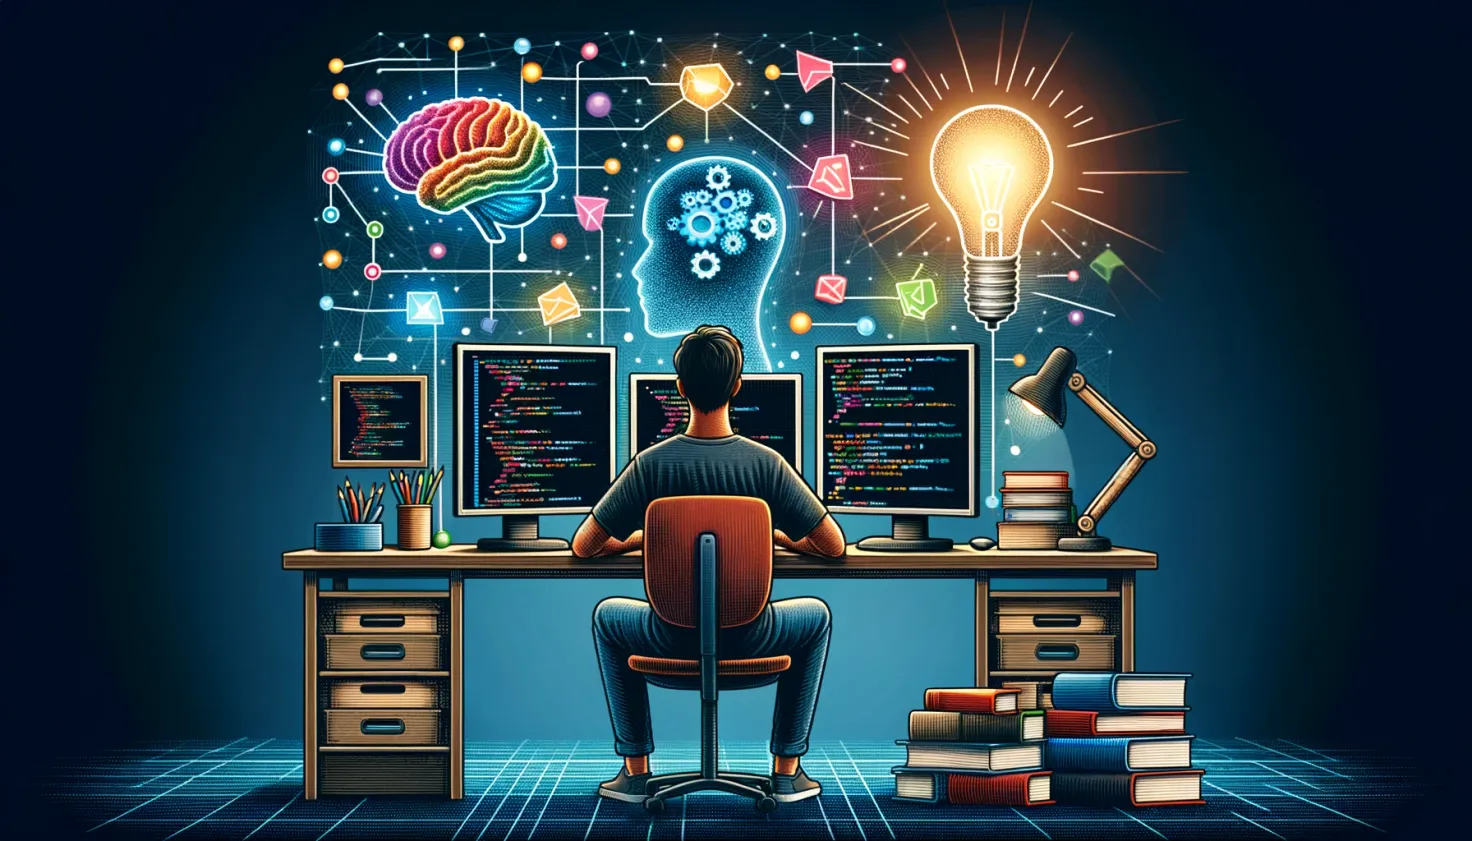 person sitting at a desk with multiple monitors displaying code, light bulb, stack of books, colorful brain graphic